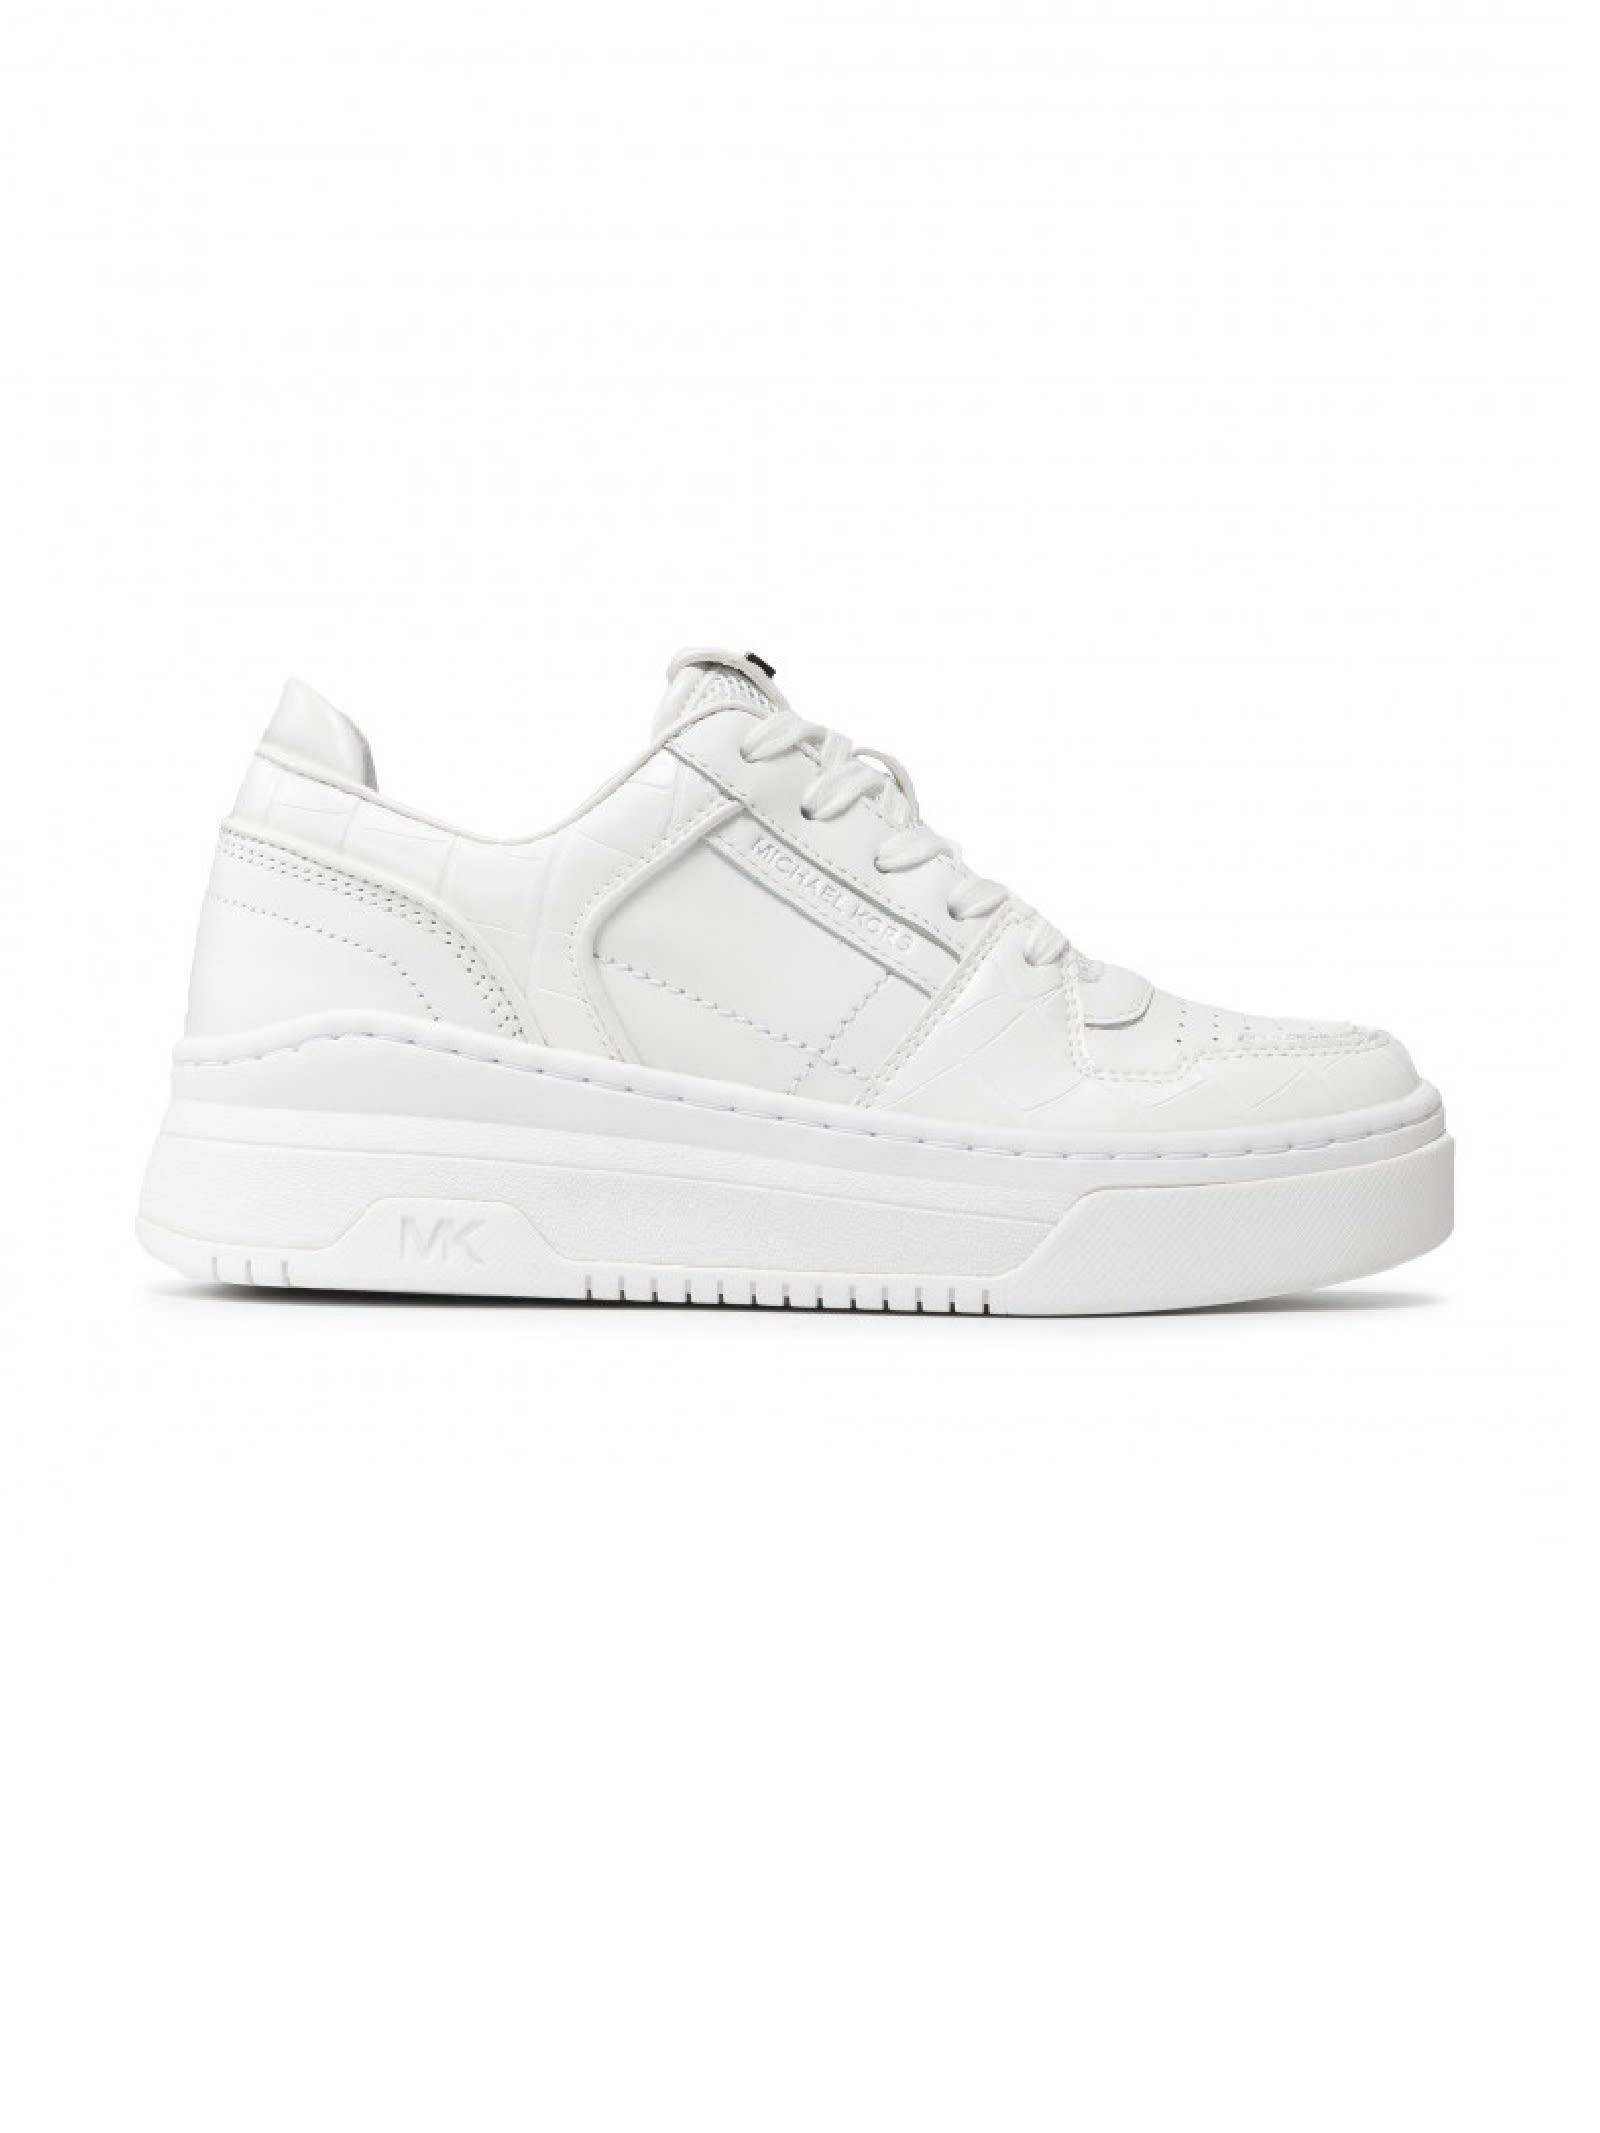 Michael Kors Leather Lexi Sneaker in Bright White (White) - Save 1 